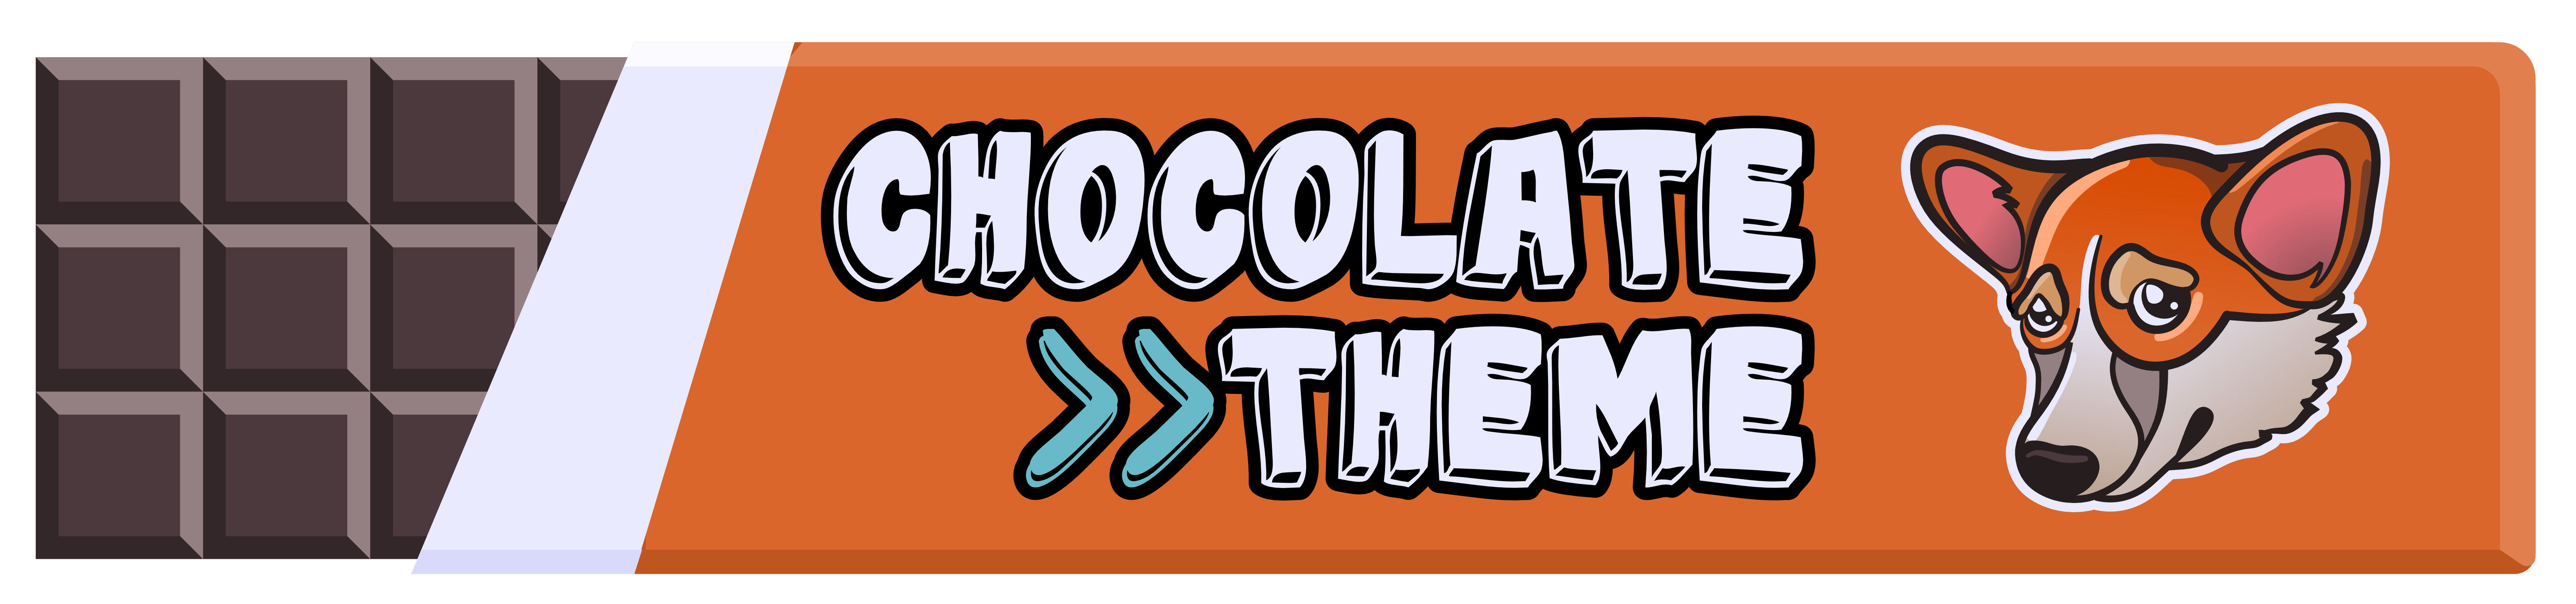 Chocolate_banner.png